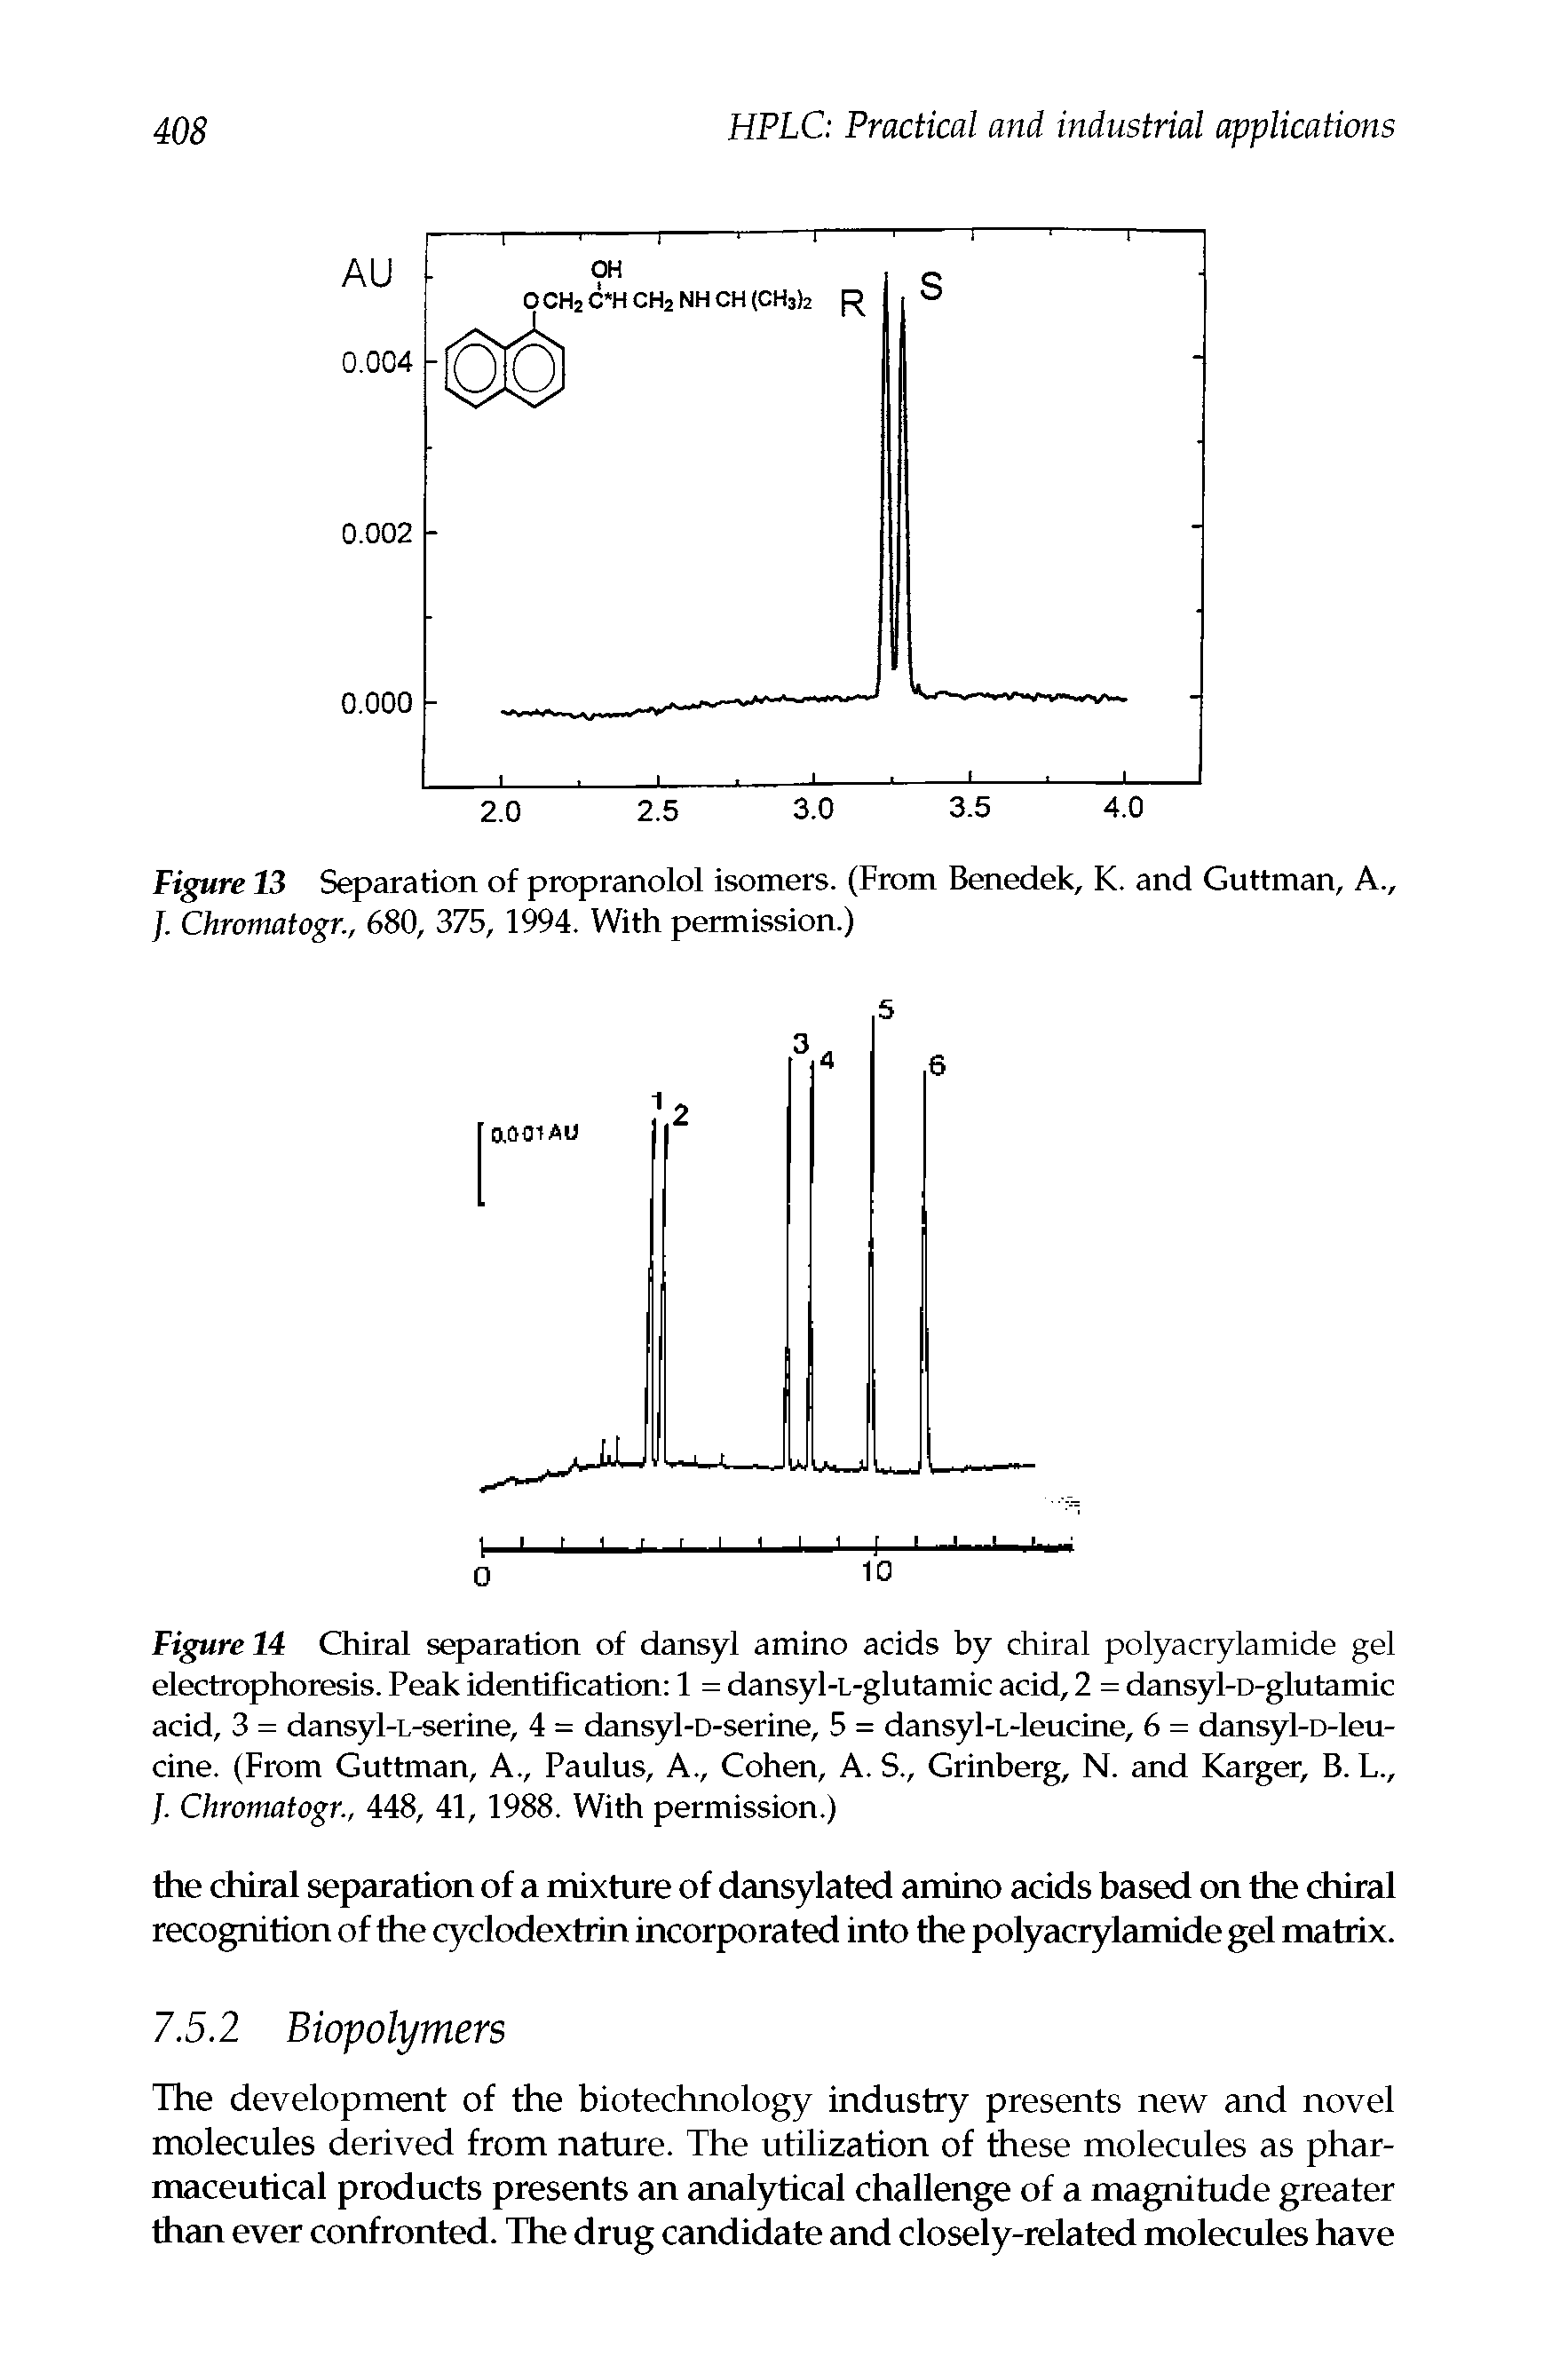 Figure 14 Chiral separation of dansyl amino acids by chiral polyacrylamide gel electrophoresis. Peak identification 1 = dansyl-L-glutamic acid, 2 = dansyl-D-glutamic acid, 3 = dansyl-L-serine, 4 = dansyl-D-serine, 5 = dansyl-L-leucine, 6 = dansyl-D-leu-cine. (From Guttman, A., Paulus, A., Cohen, A. S., Grinberg, N. and Karger, B. L., /. Chromatogr., 448, 41, 1988. With permission.)...